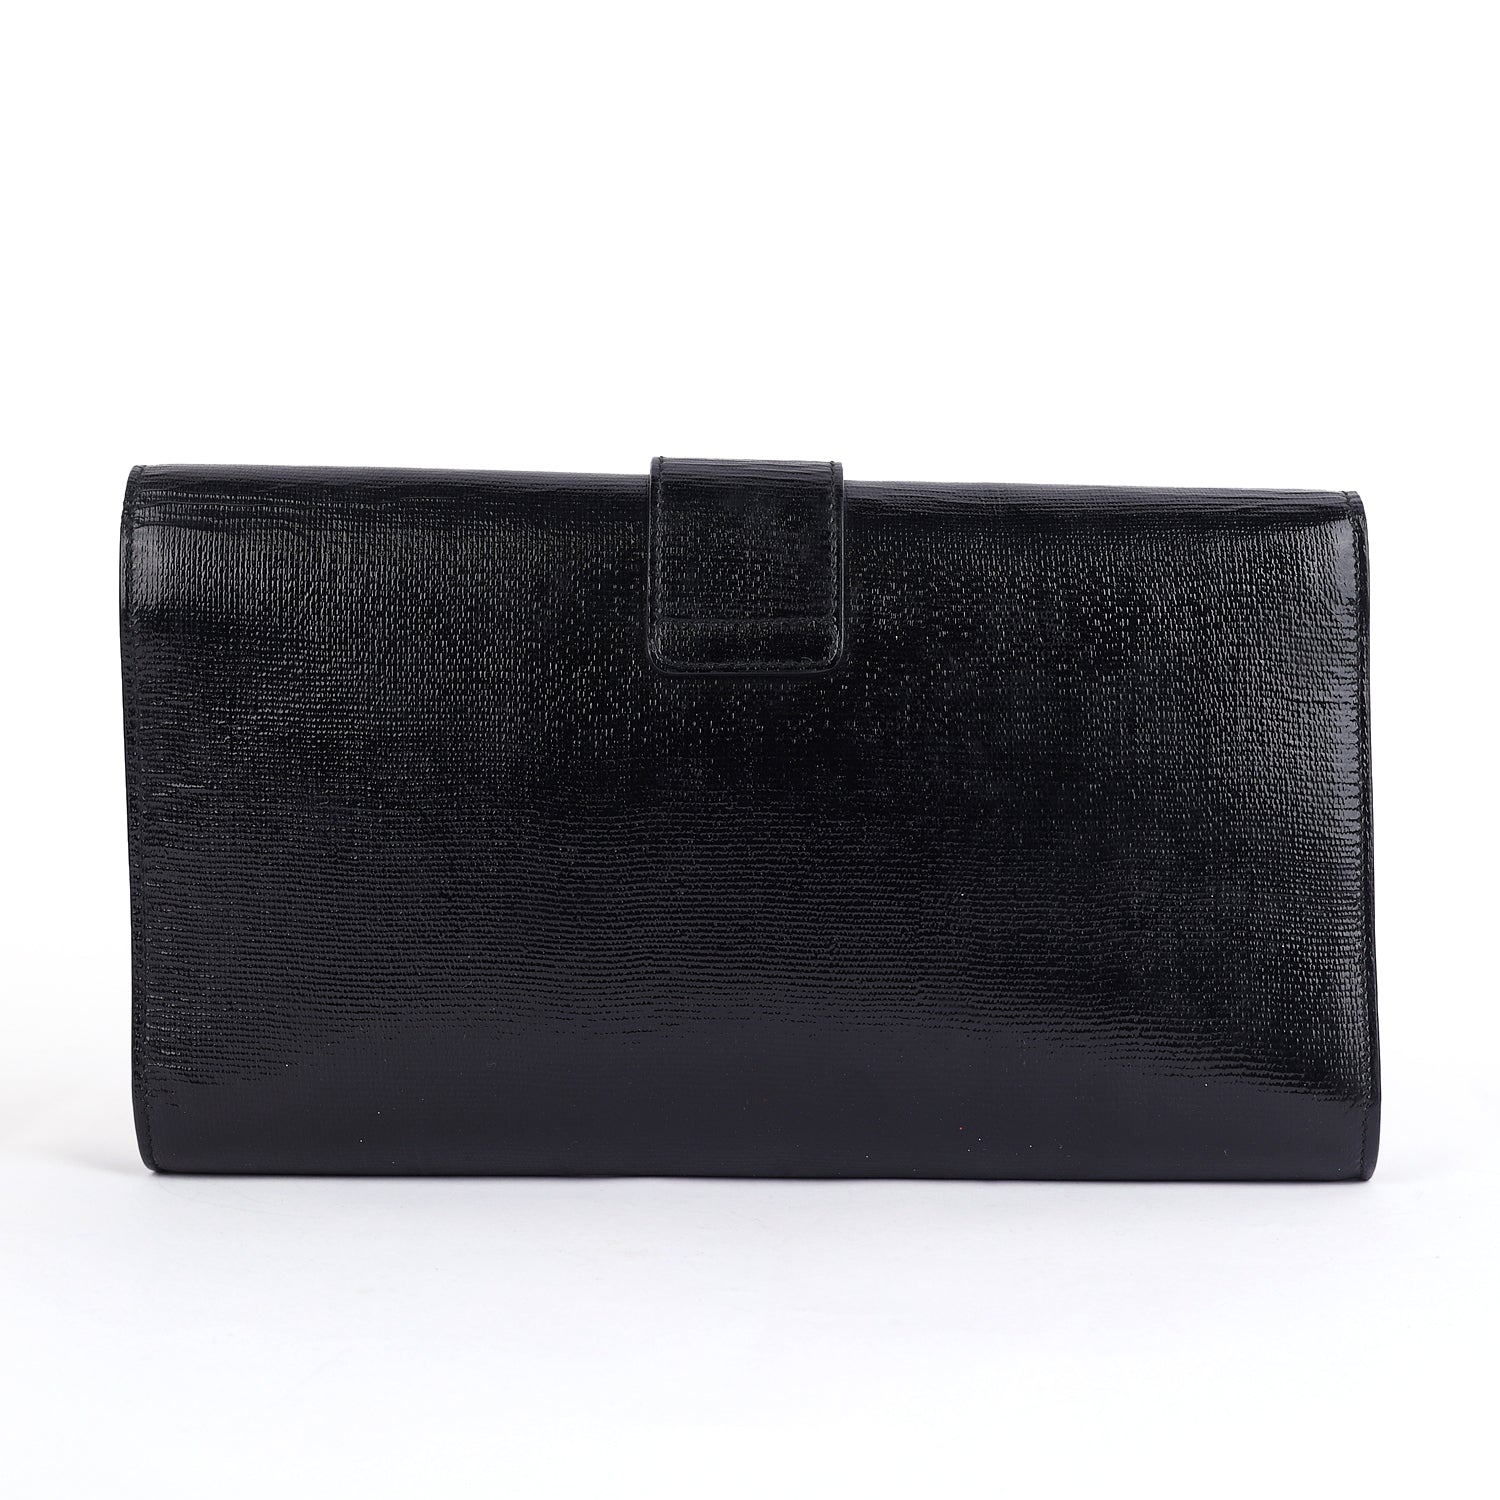 Leather Large Chic Clutch